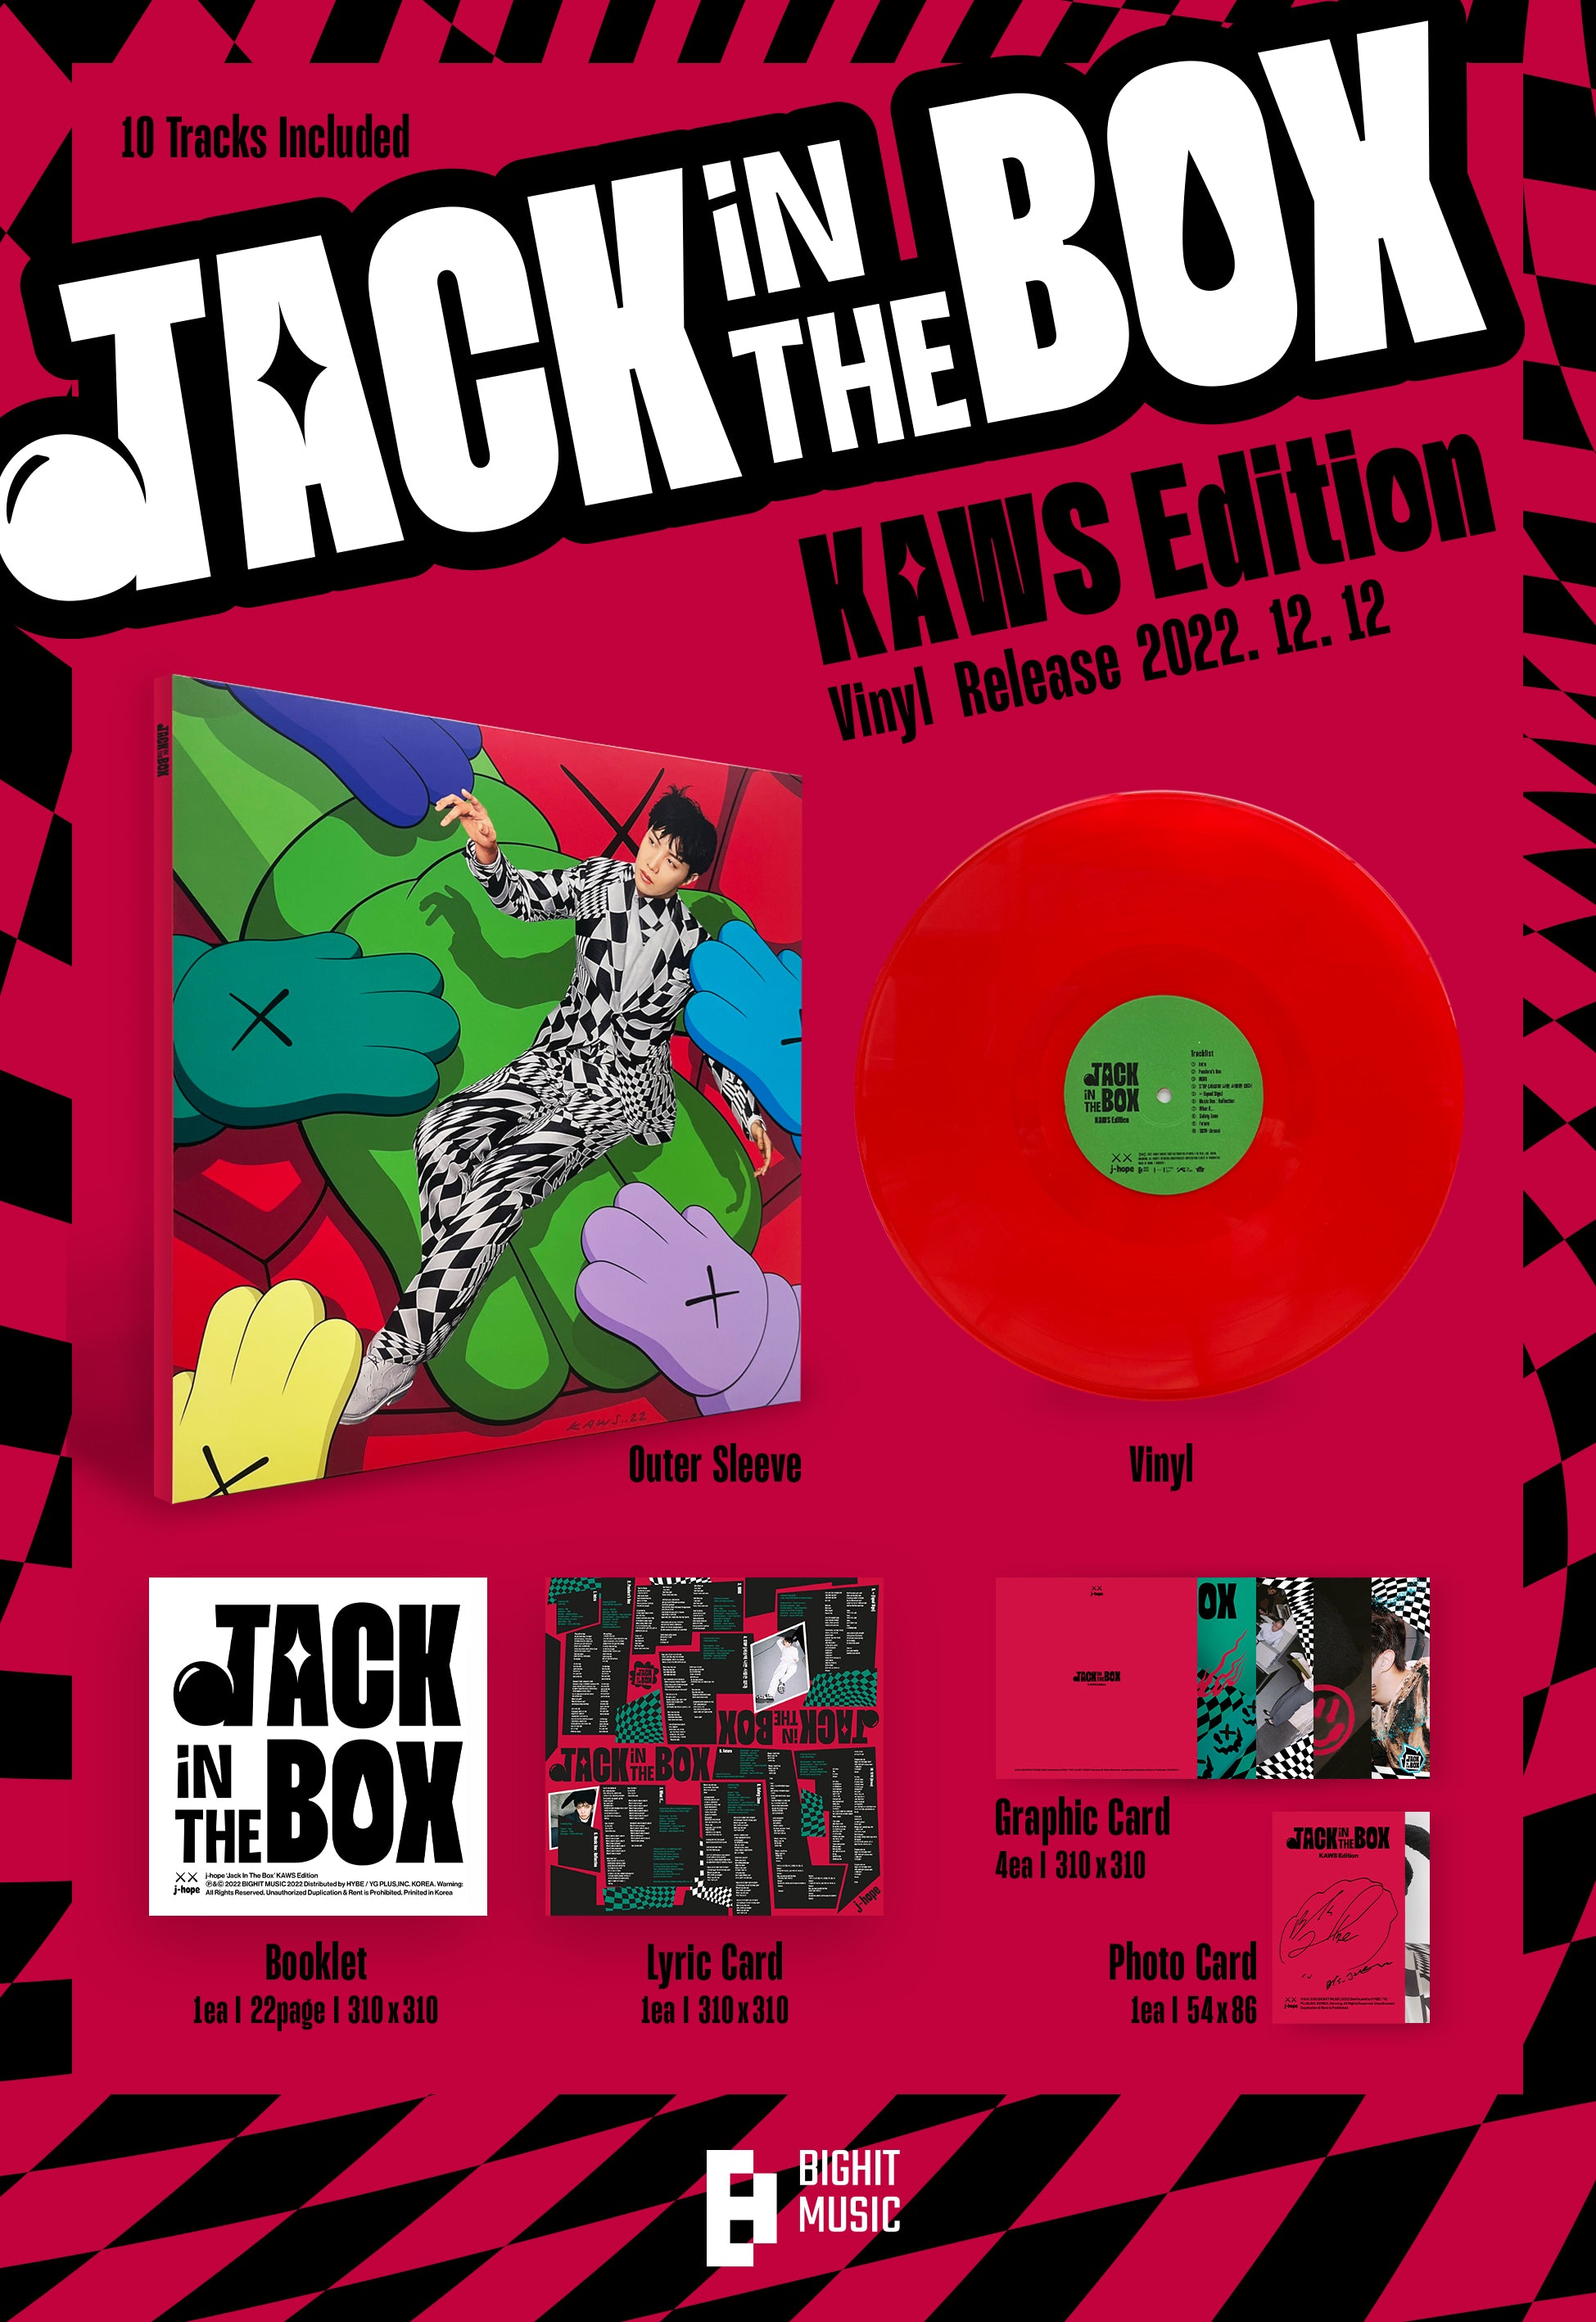 j-hope - Jack In The Box [LP] (Limited Edition)